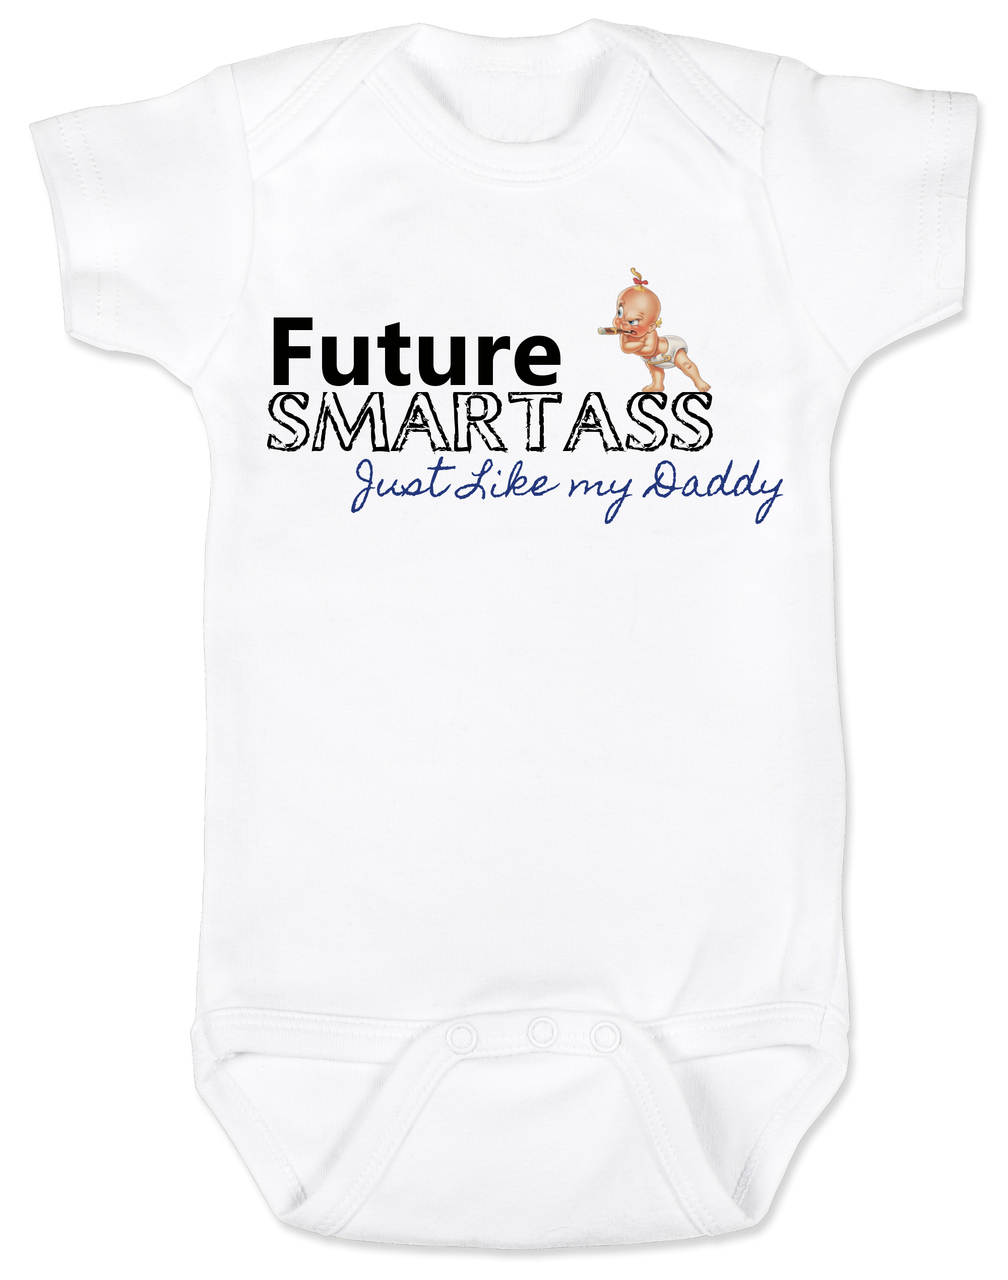 Image of funny baby jumpsuits